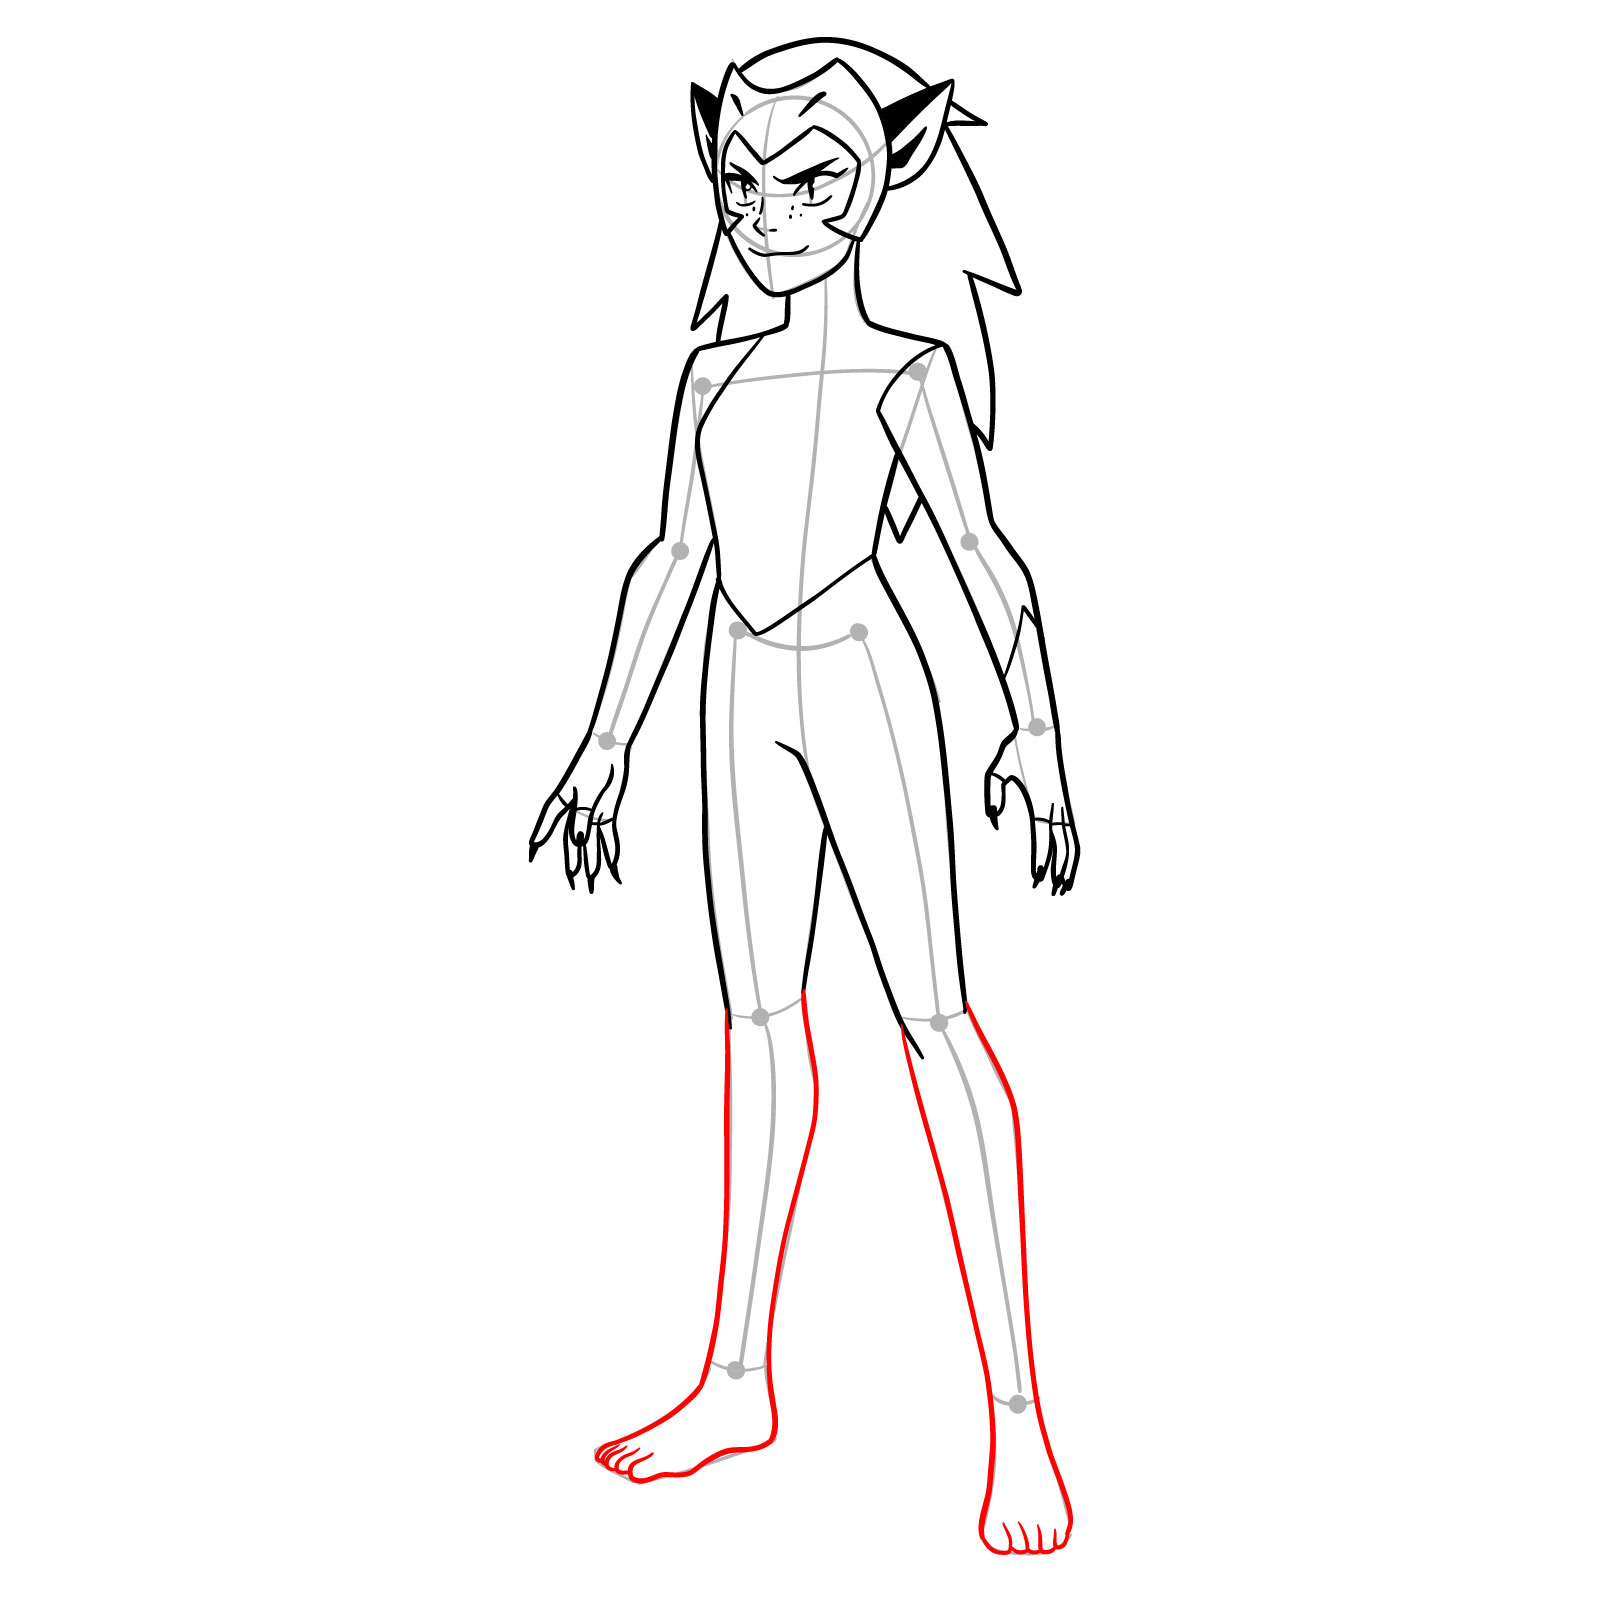 How to draw Catra from She-Ra and the Princesses of Power - step 15